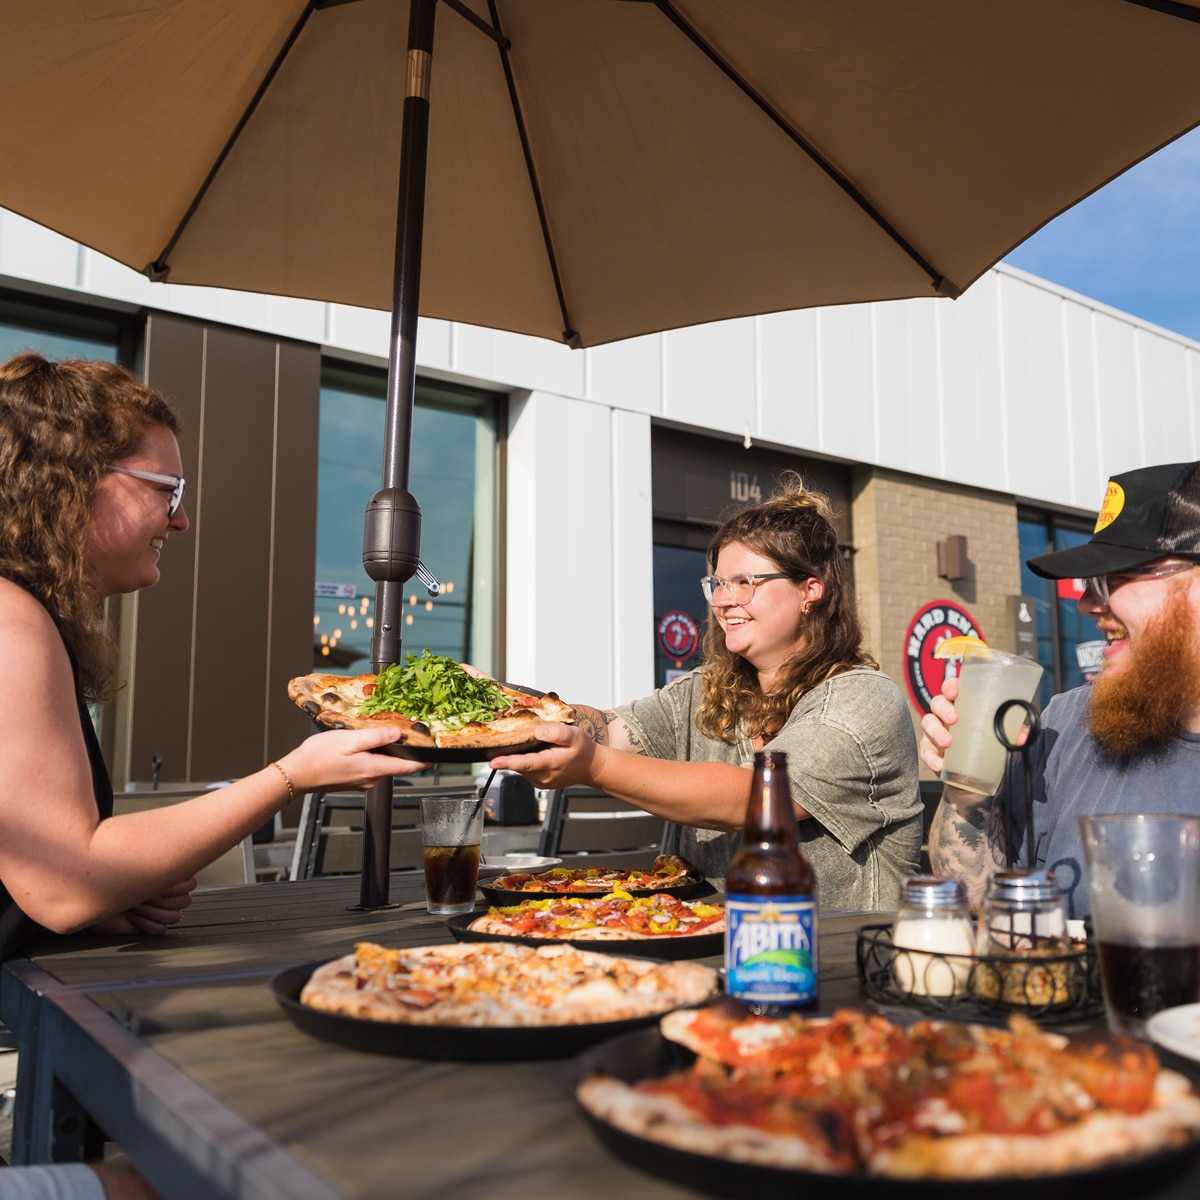 Hard Knox Pizza brings people together creating a great atmosphere where families and friends can enjoy a meal together